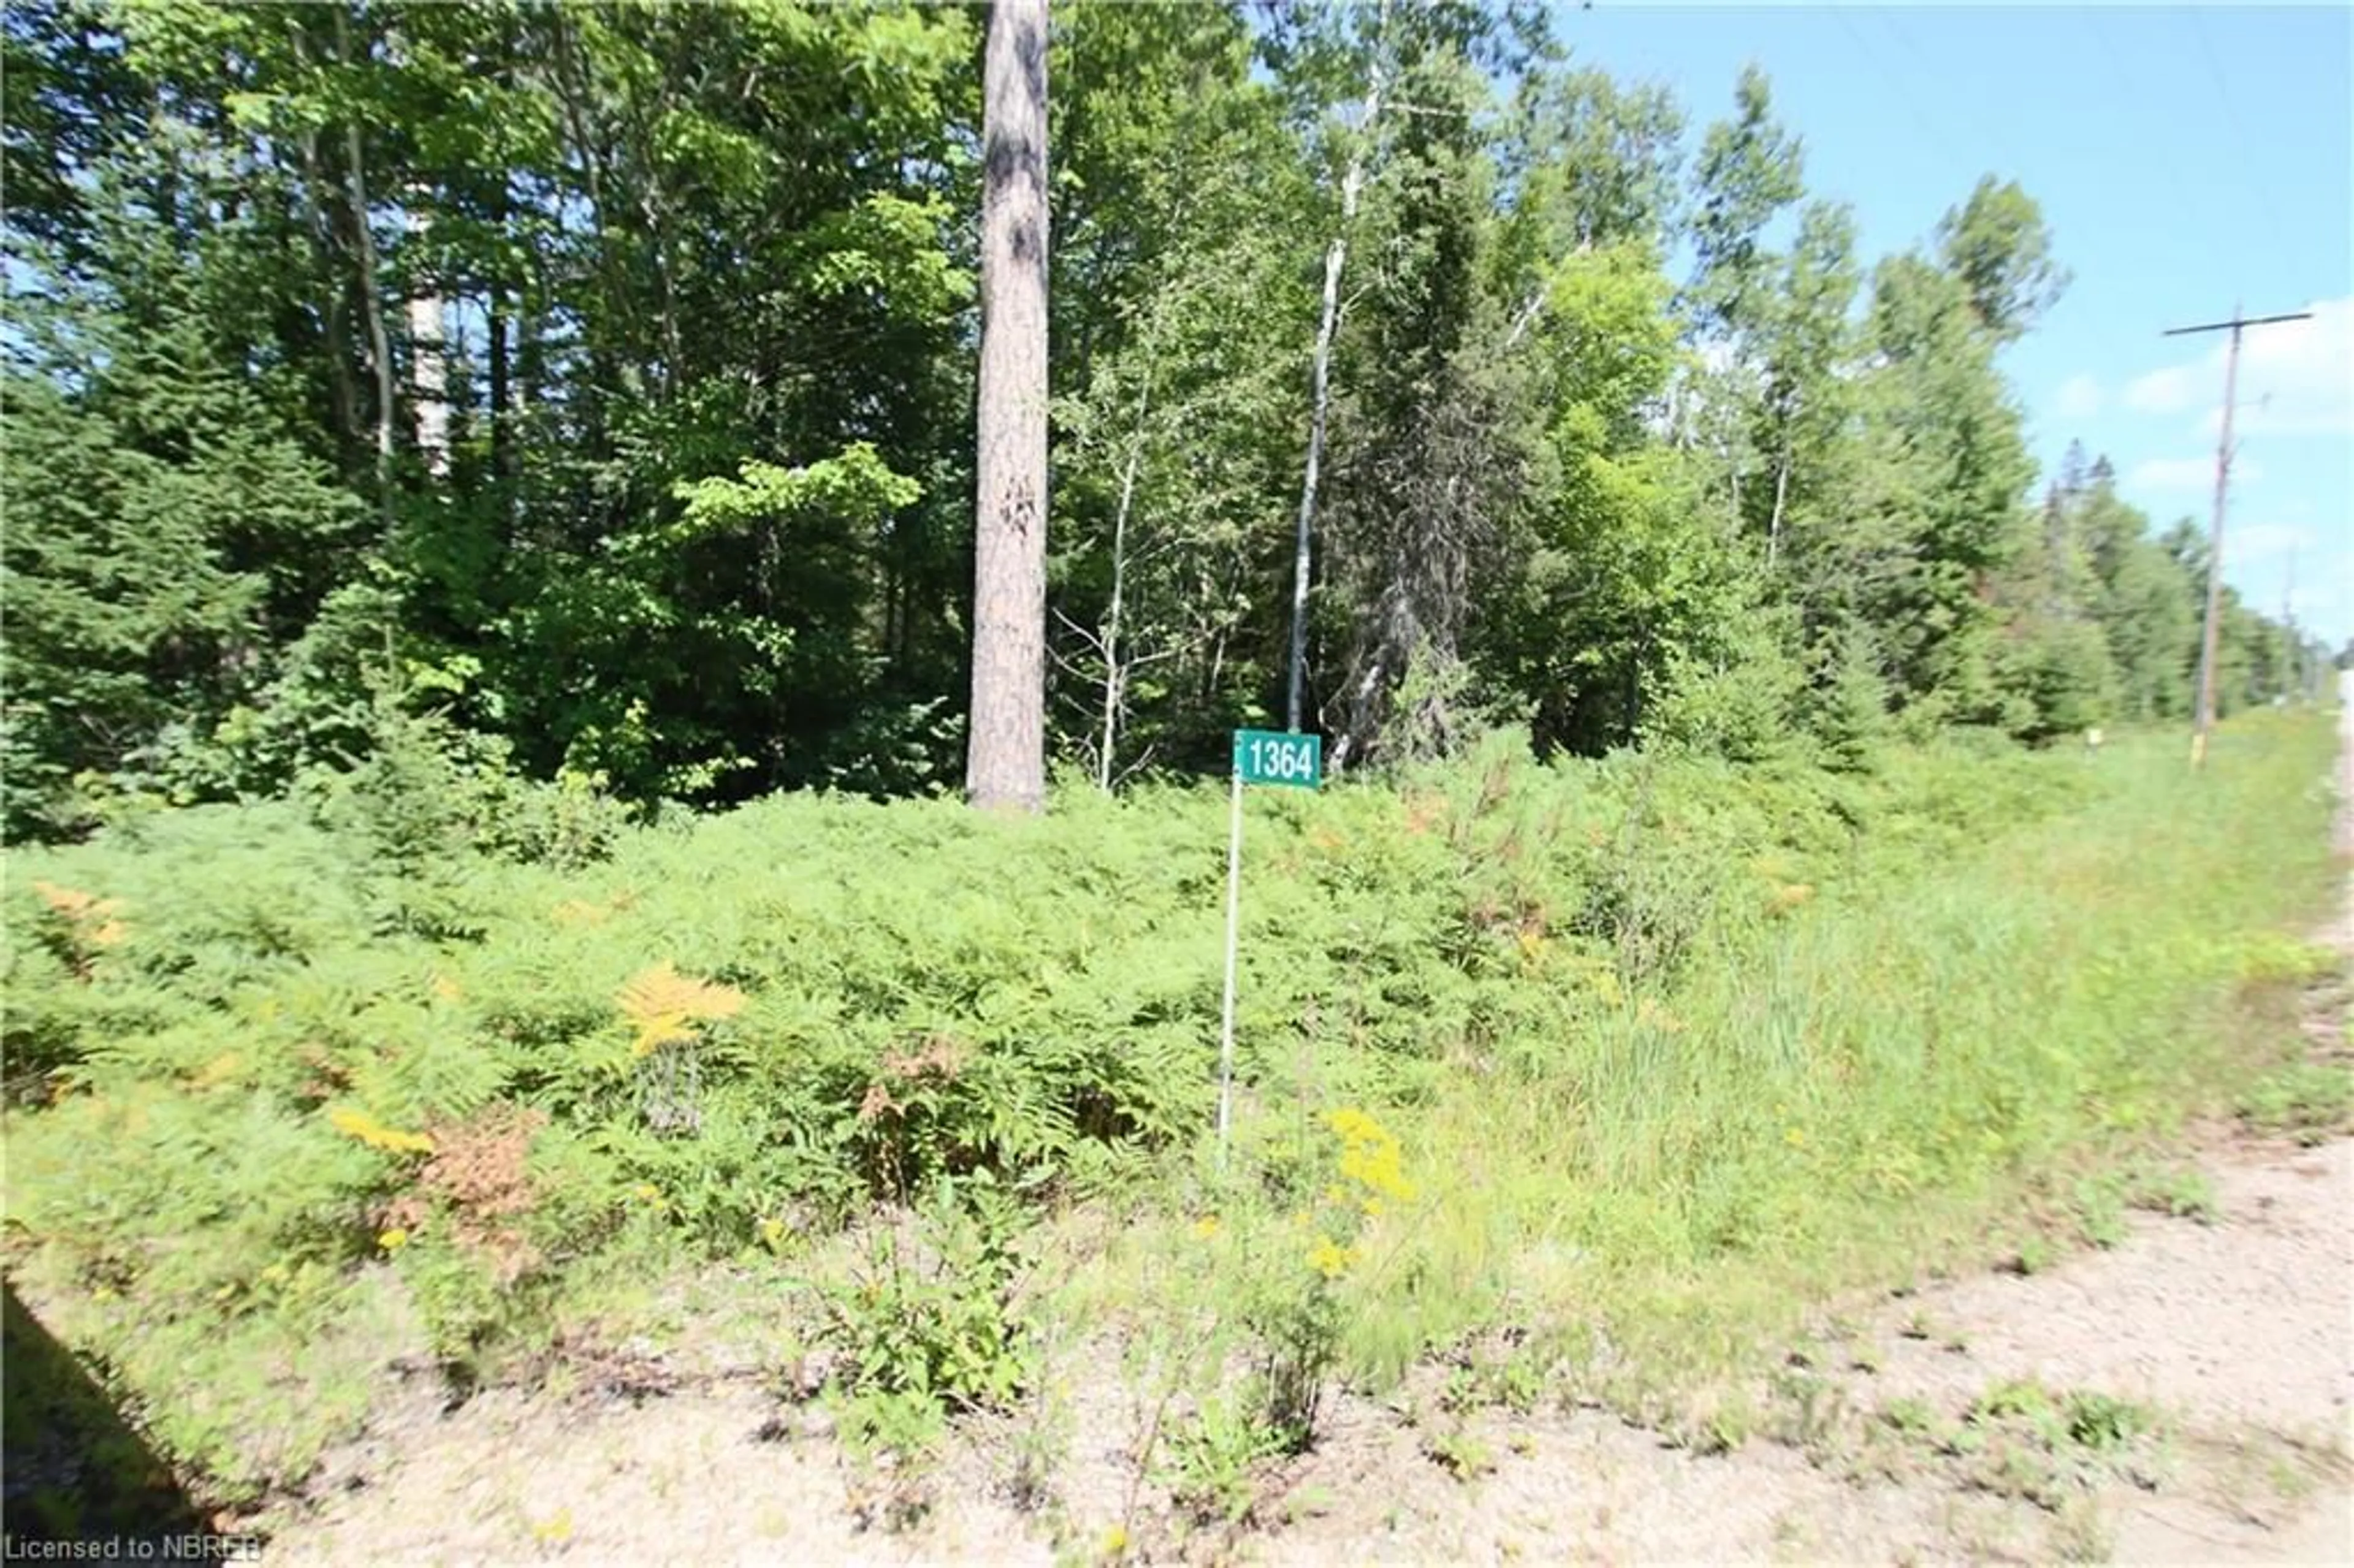 Forest view for 1364 Hwy 654, Callander Ontario P0H 1H0